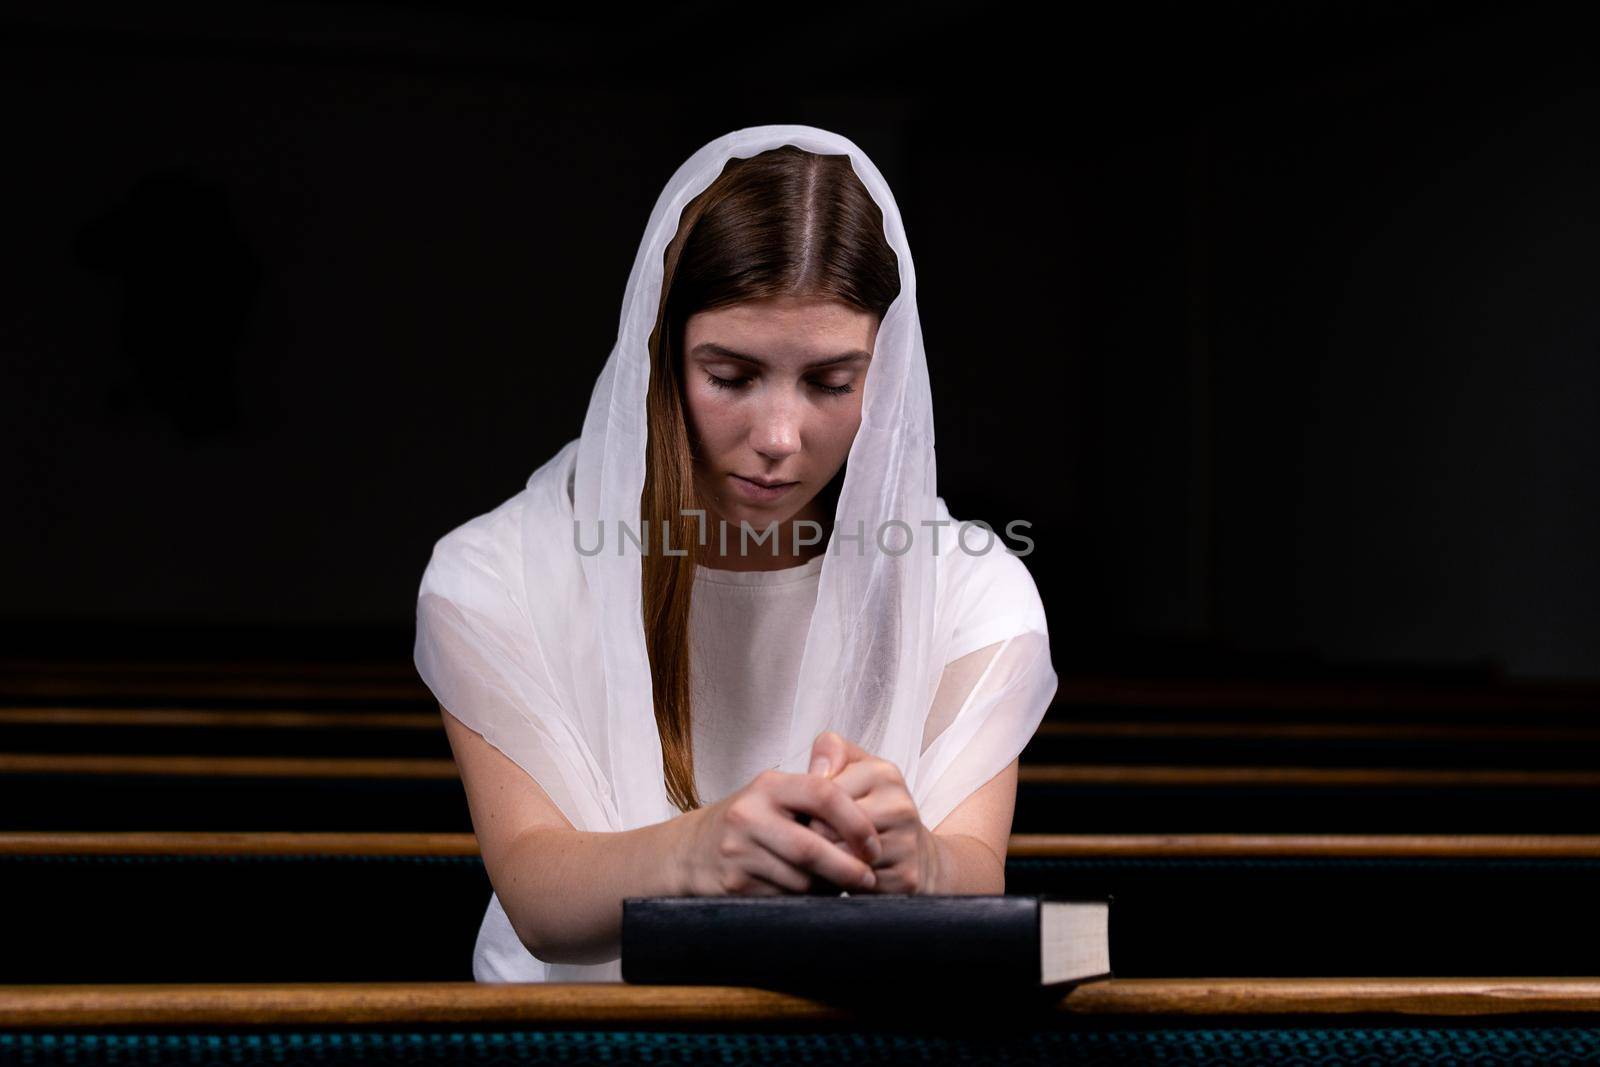 A young modest girl with a handkerchief on her head and a bible in her hands is sitting in church and praying. The concept of religion, prayer, worship.